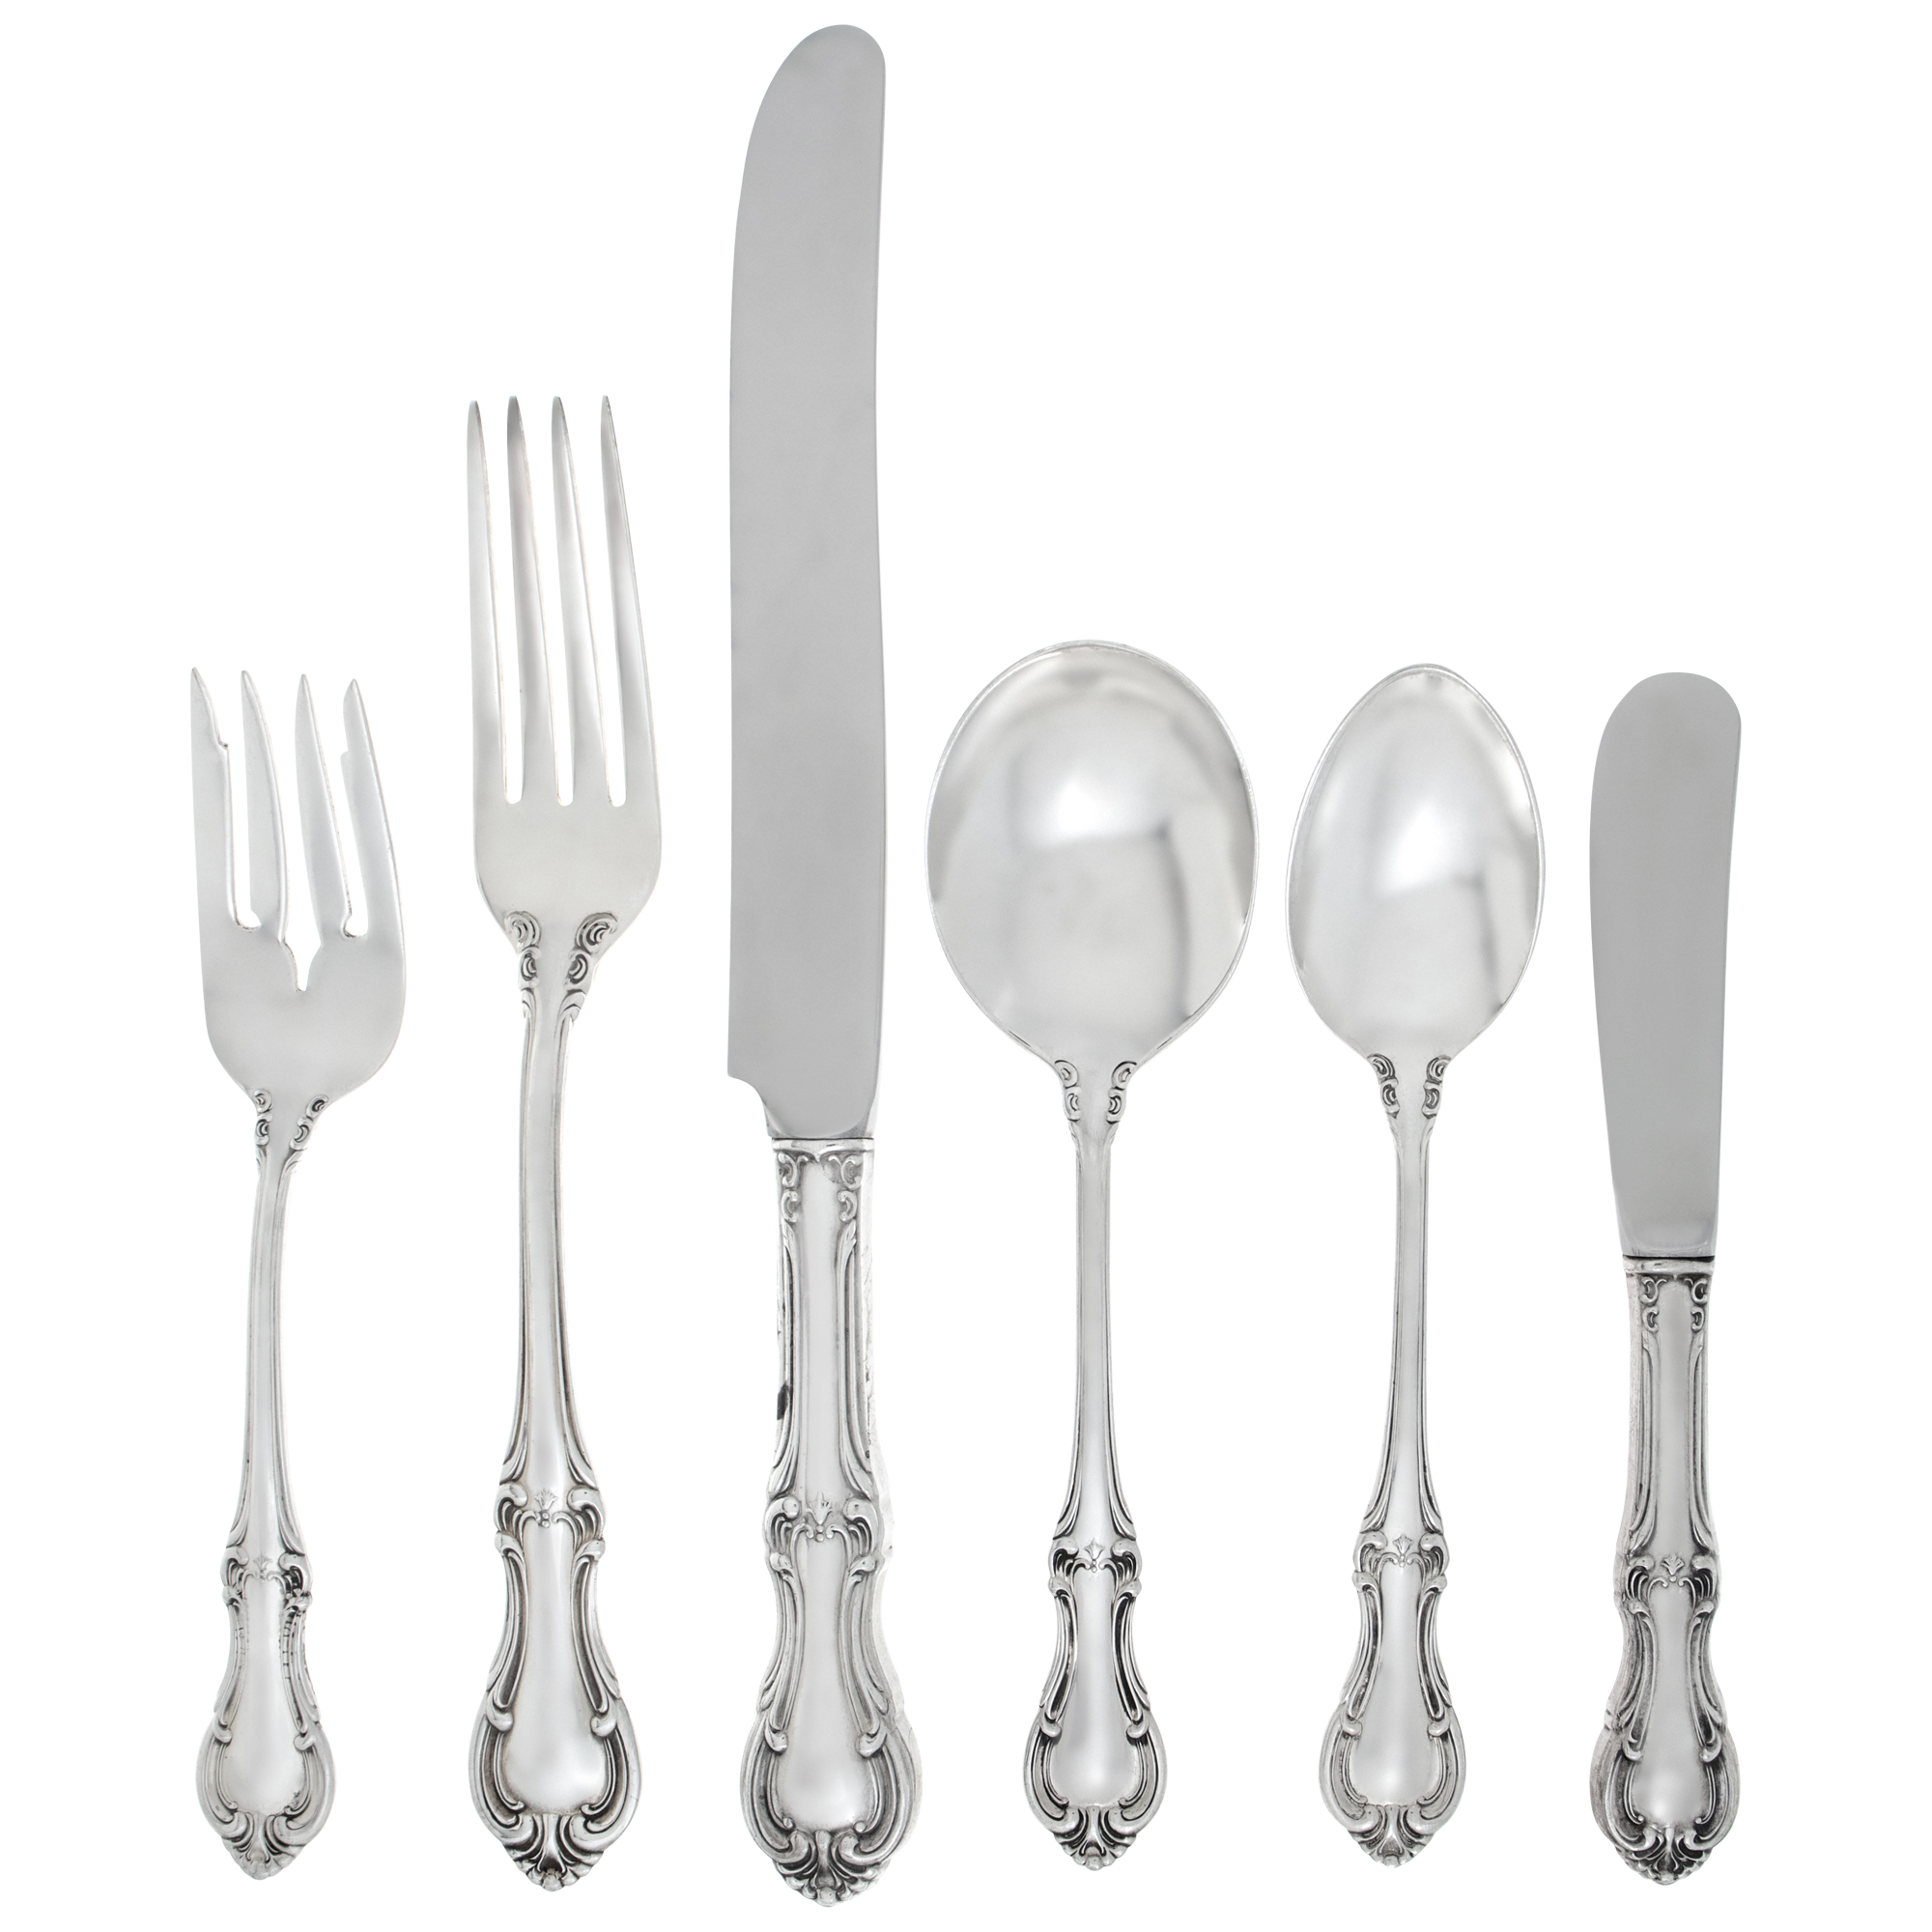 JOAN OPF ARC sterling silver flatware set ptd in 1940 by the International Sterling Silver Co. Over 75 Troy Ounces of .925 sterling silver. 6 place settings for 9 + 15 serving pieces. image 1